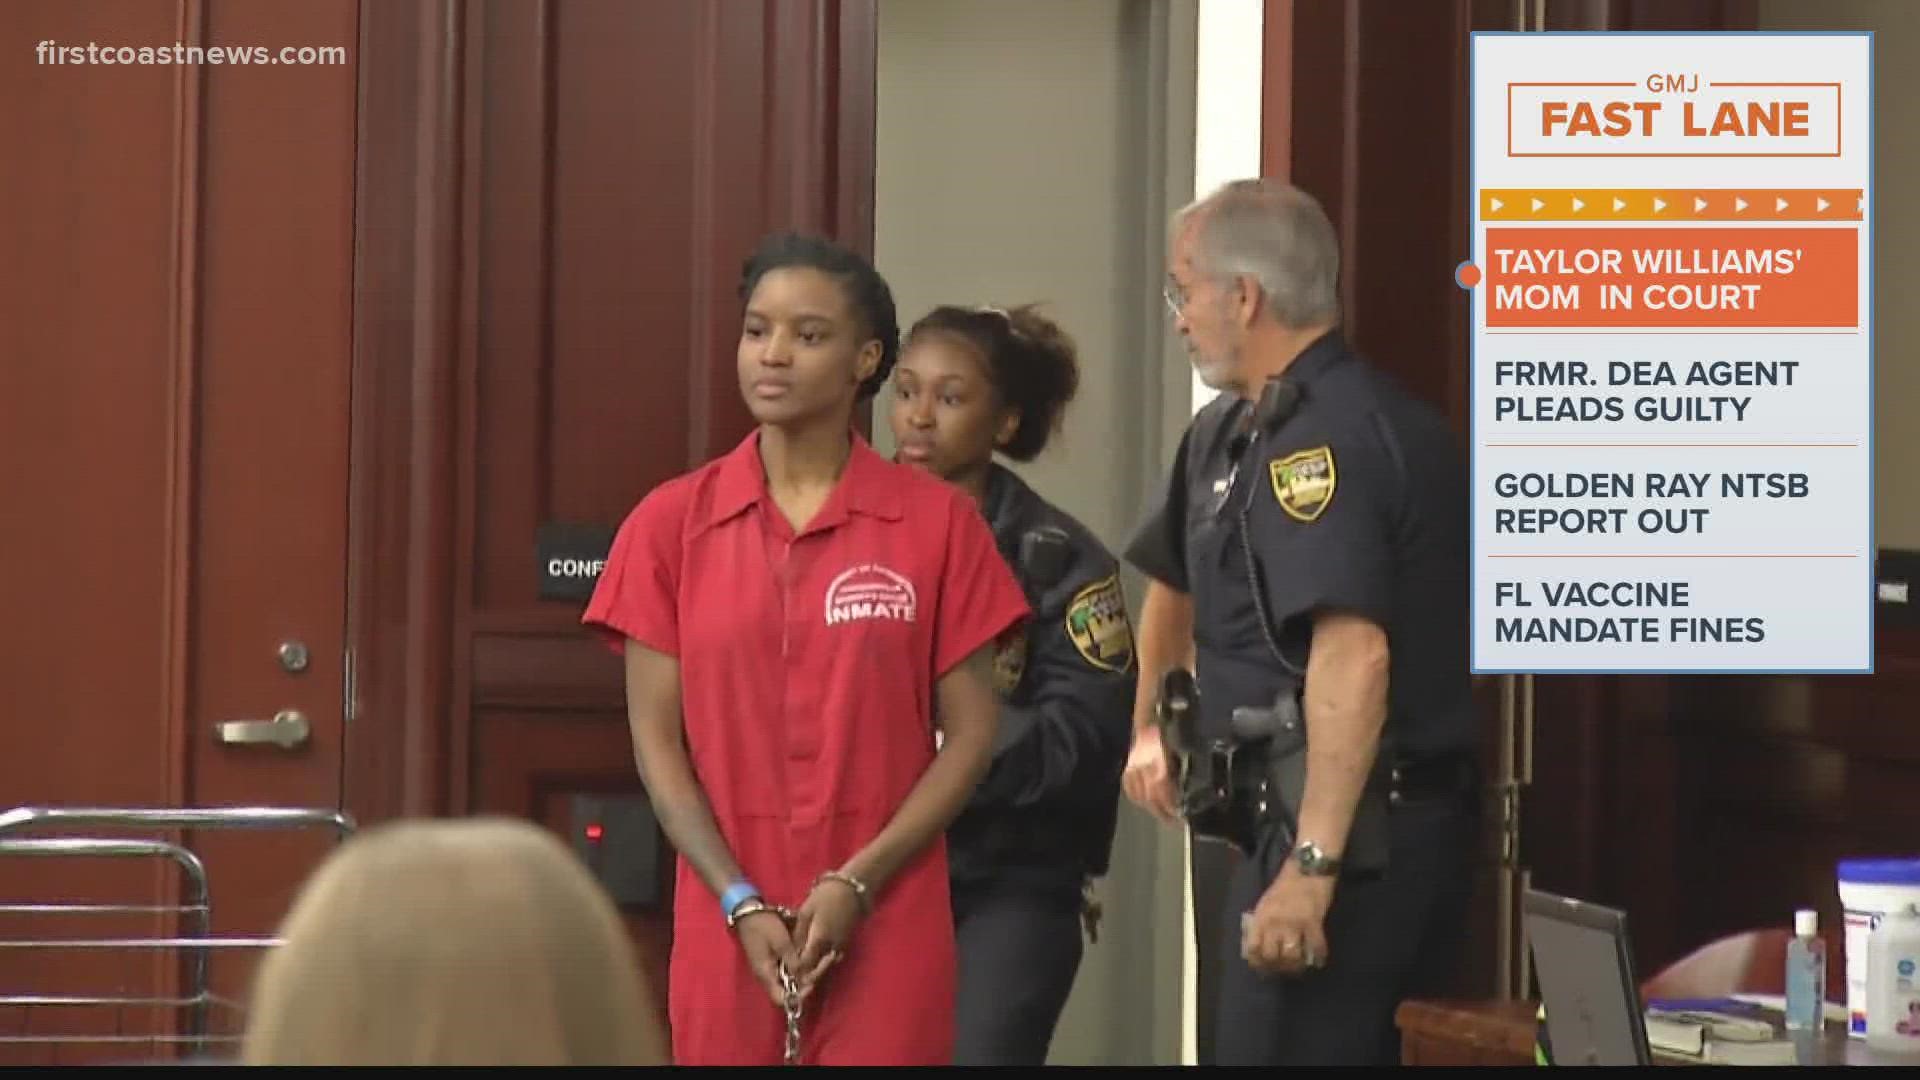 Brianna Williams is charged with aggravated child abuse, lying to police and tampering with evidence in connection to the death of her 5-year-old daughter, Taylor.